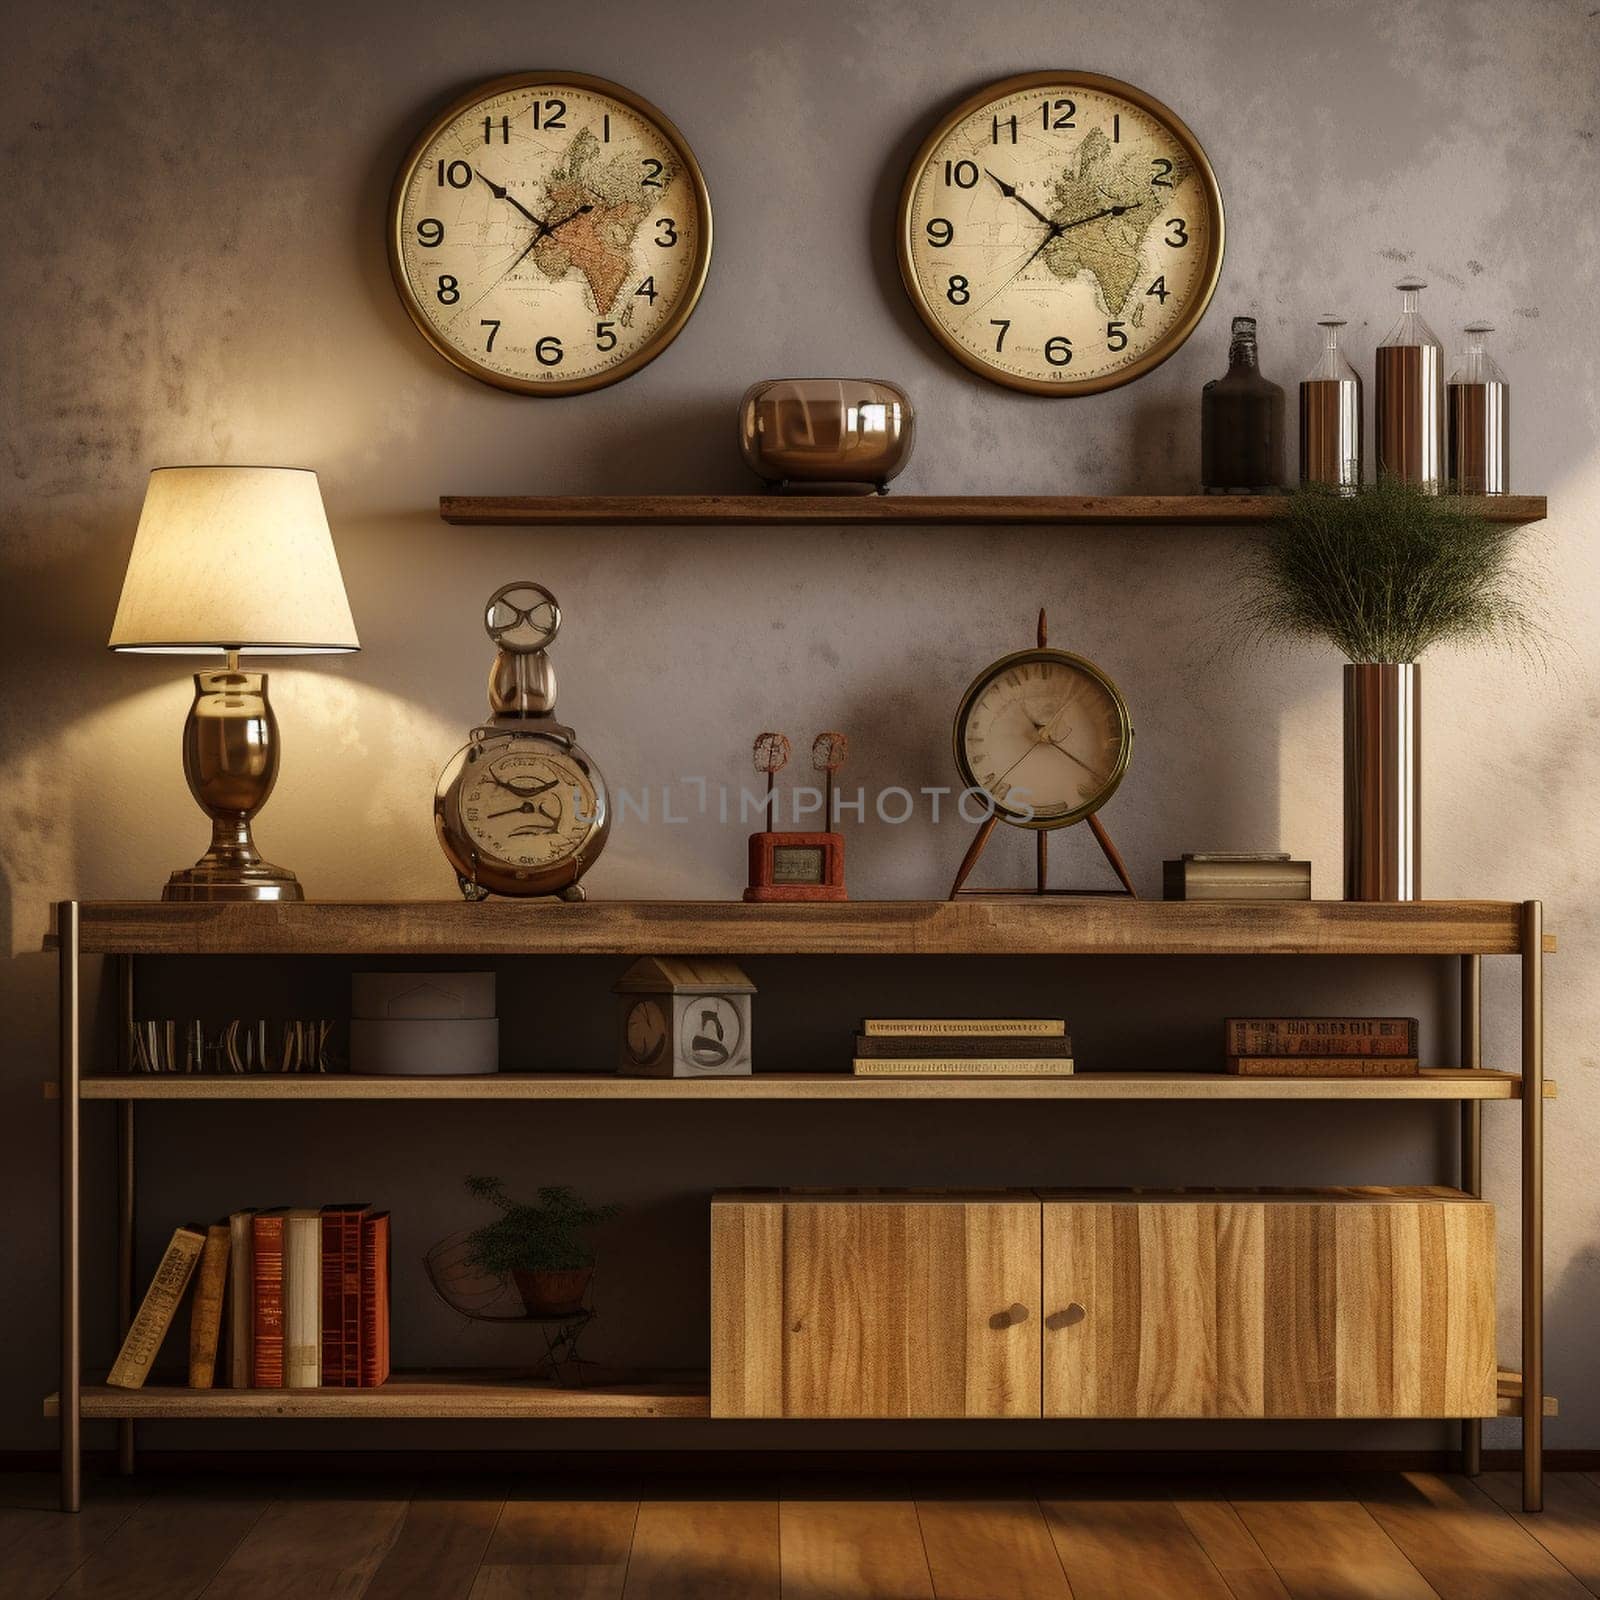 Step into the past with this realistic art style image featuring a collection of vintage clocks arranged on a wooden shelf. The backdrop is a cozy vintage-themed interior that evokes a sense of nostalgia and warmth. Each clock in the collection showcases unique designs, with intricate details and retro aesthetics. The clocks vary in size, shape, and style, ranging from ornate classical designs to sleek mid-century modern styles. The lighting in the scene emphasizes warm tones, enhancing the nostalgic ambiance. A soft focus effect adds to the sentimental atmosphere of the image.